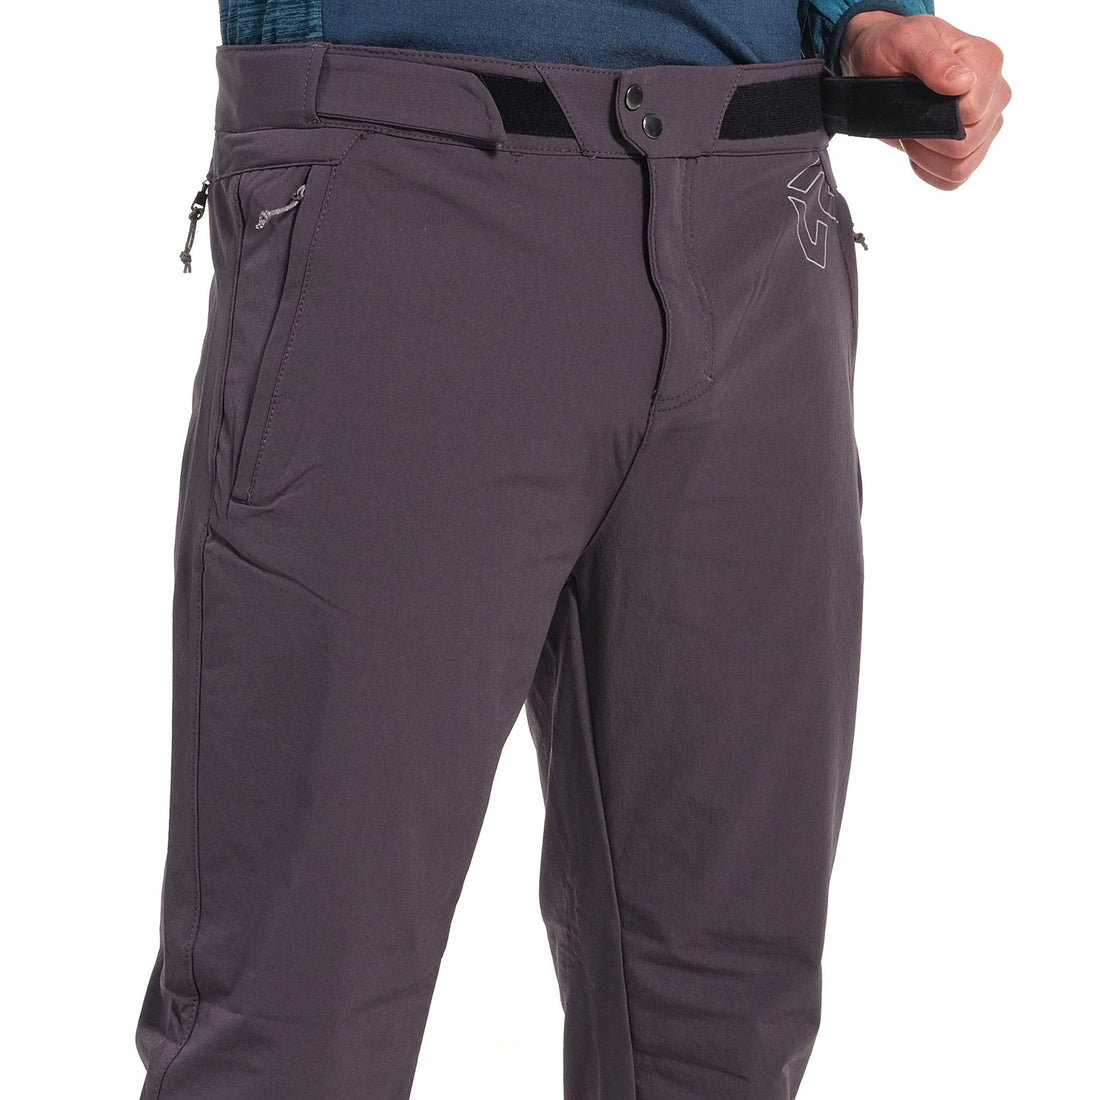 Rock Experience - STRATEGY - Men Outdoor Pant - World of Alps